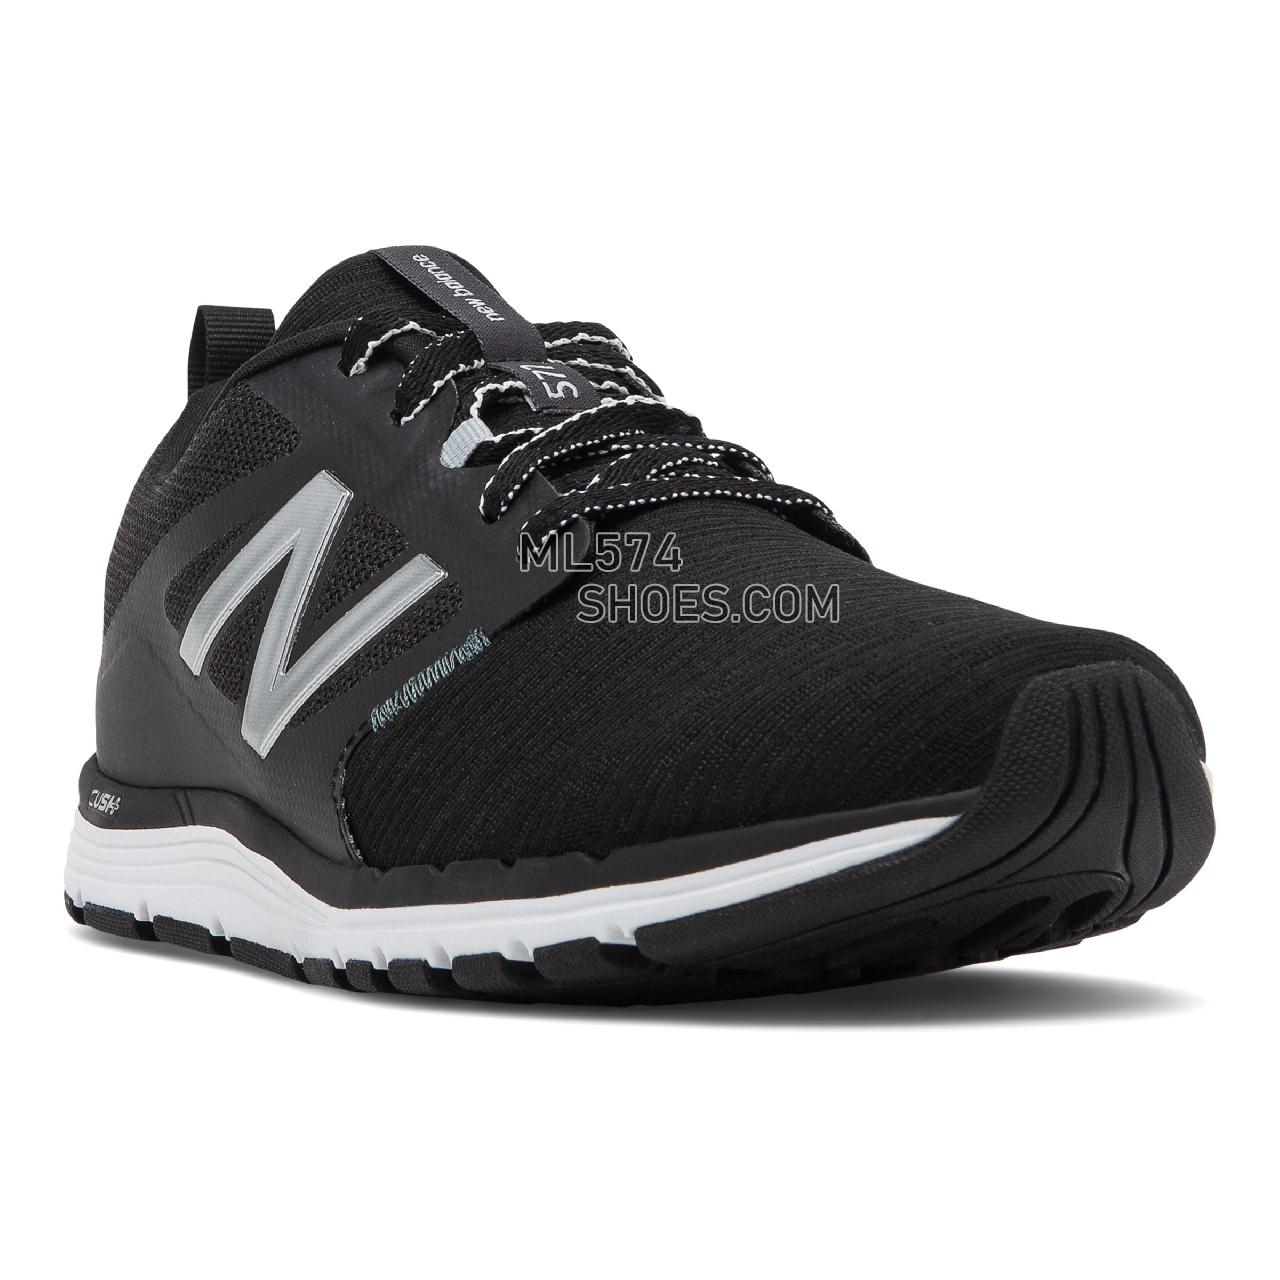 New Balance 577v5 - Women's Workout - Black with Orca and Silver Metallic - WX577LK5